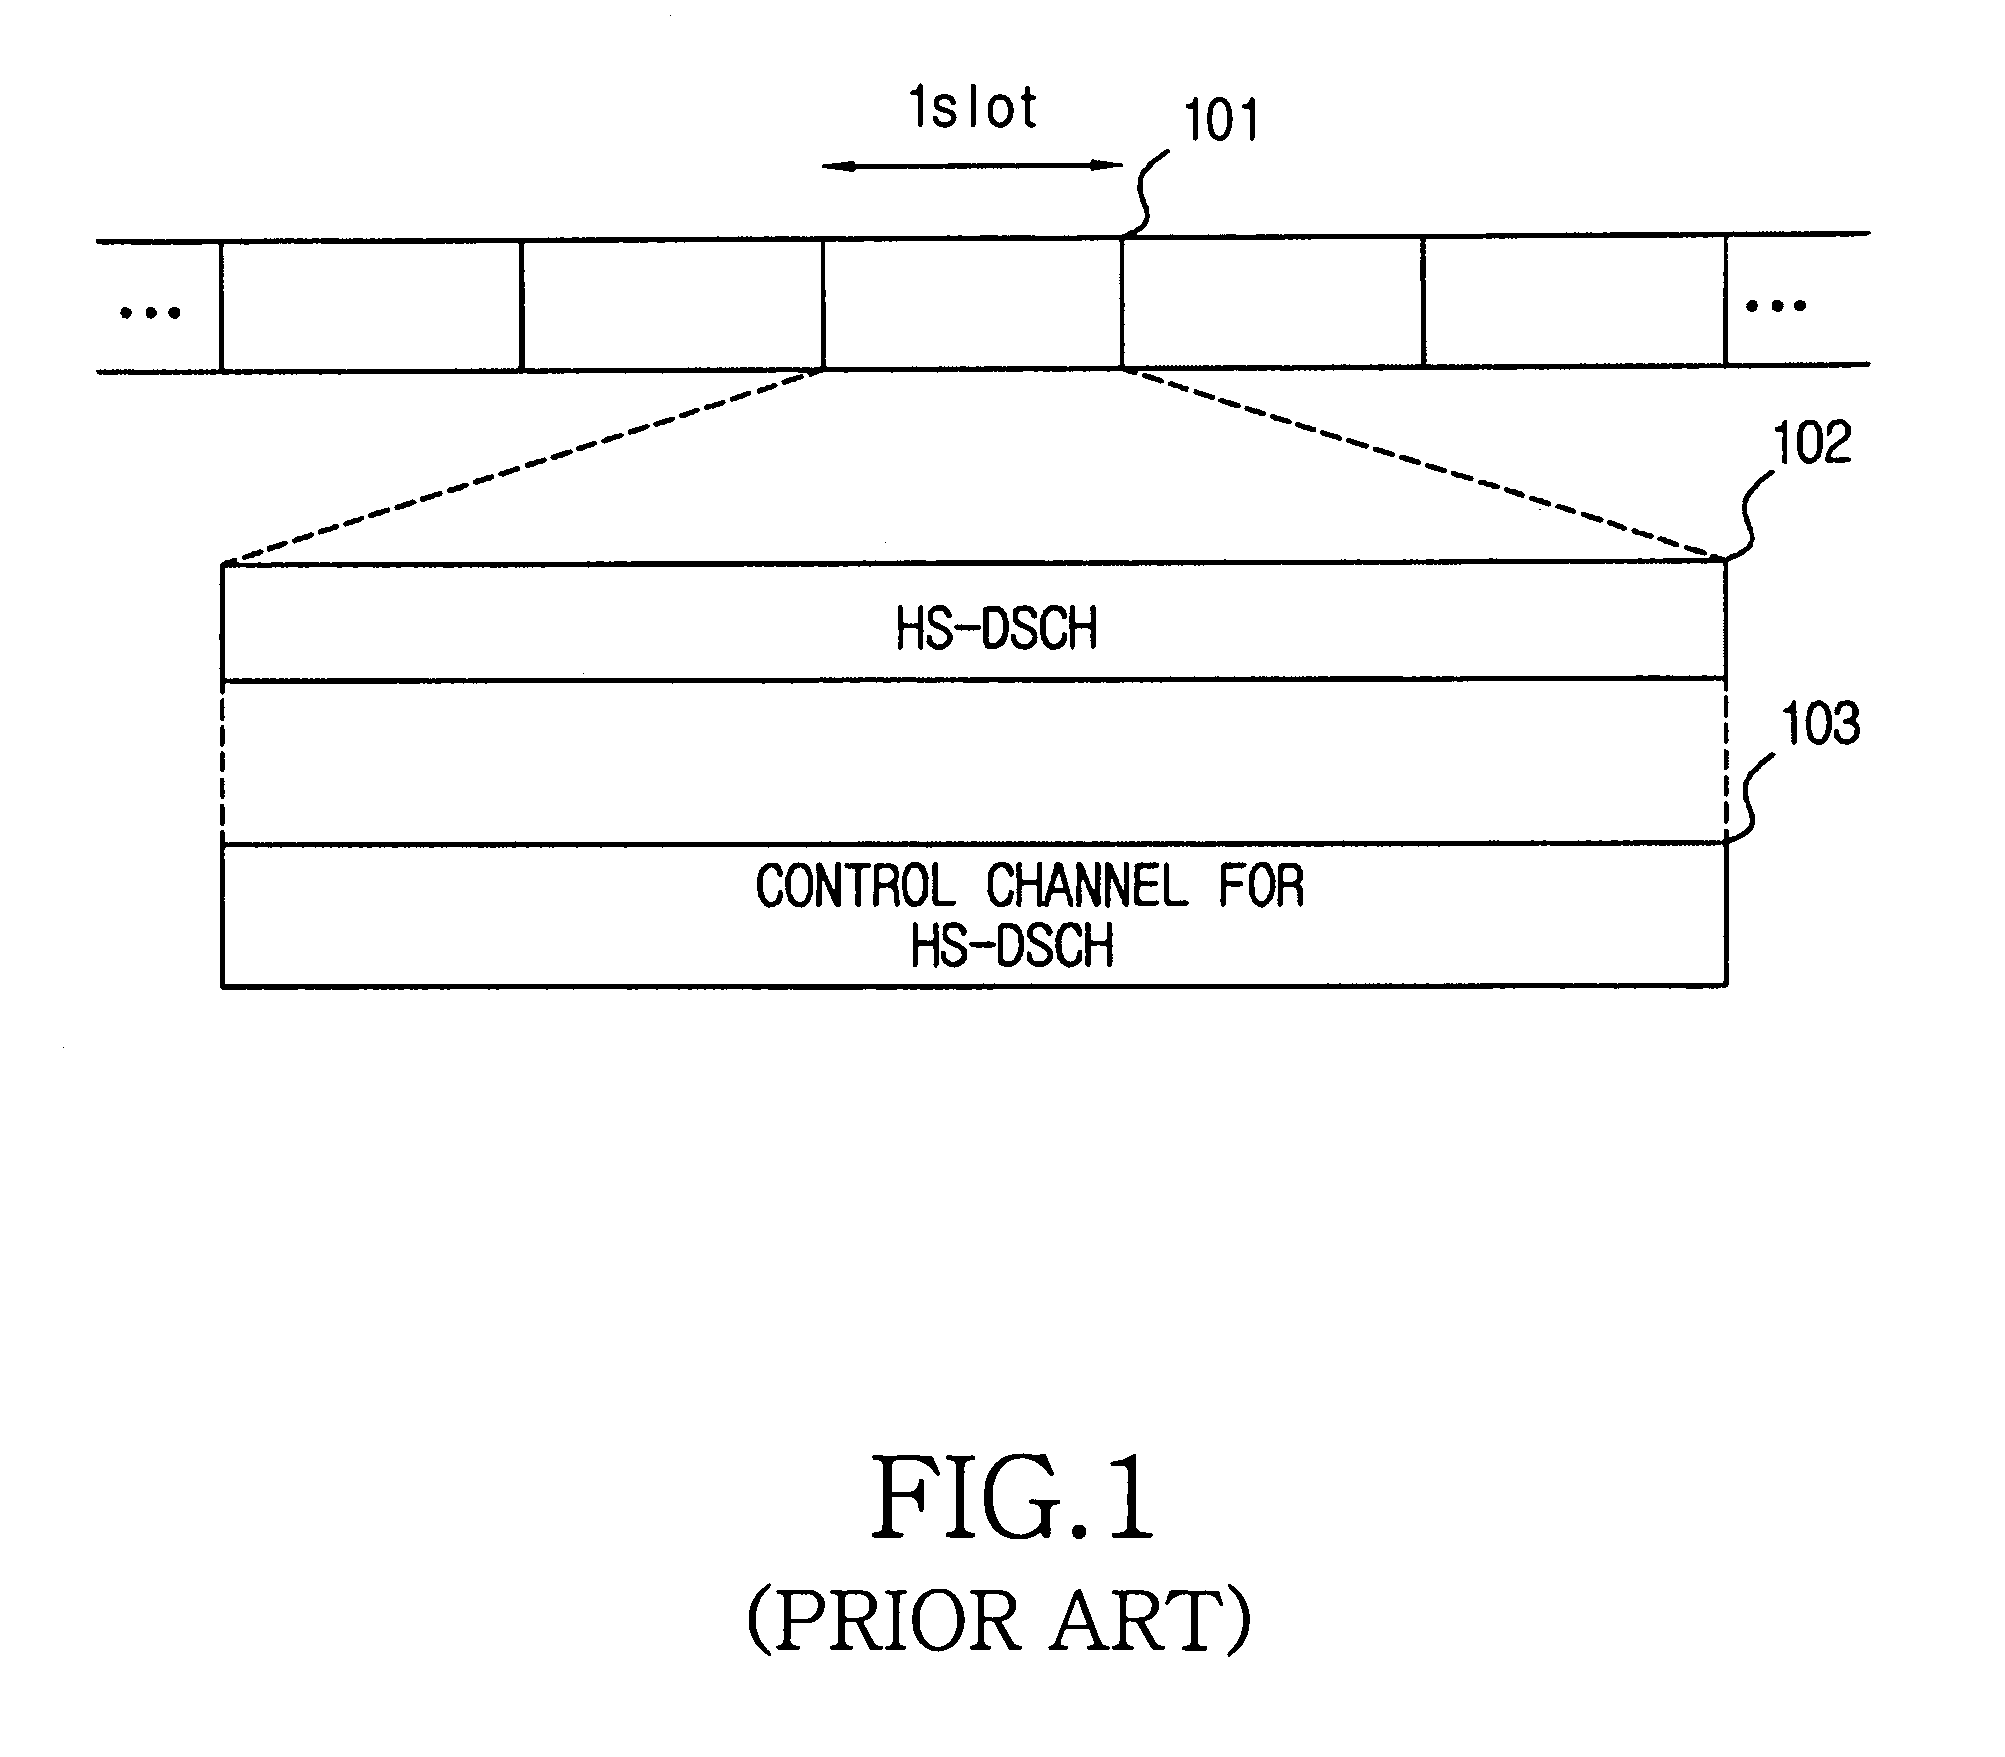 Power control apparatus and method for a W-CDMA communication system employing a high-speed downlink packet access scheme